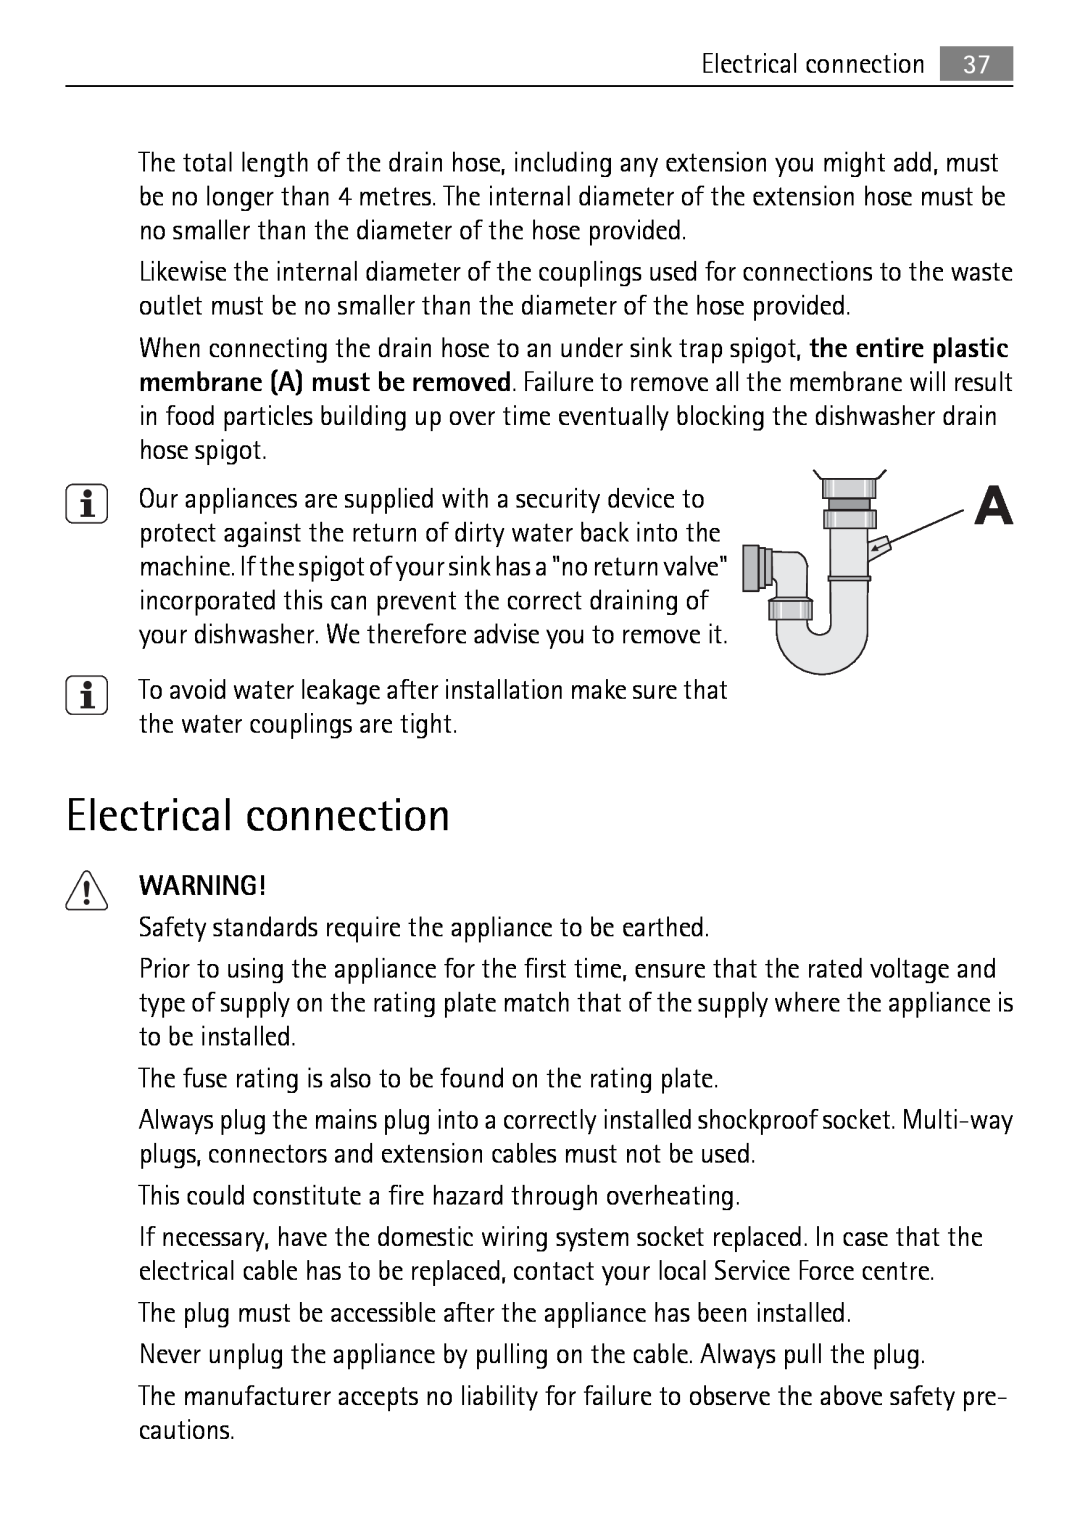 Electrolux 65011 VI user manual Electrical connection 